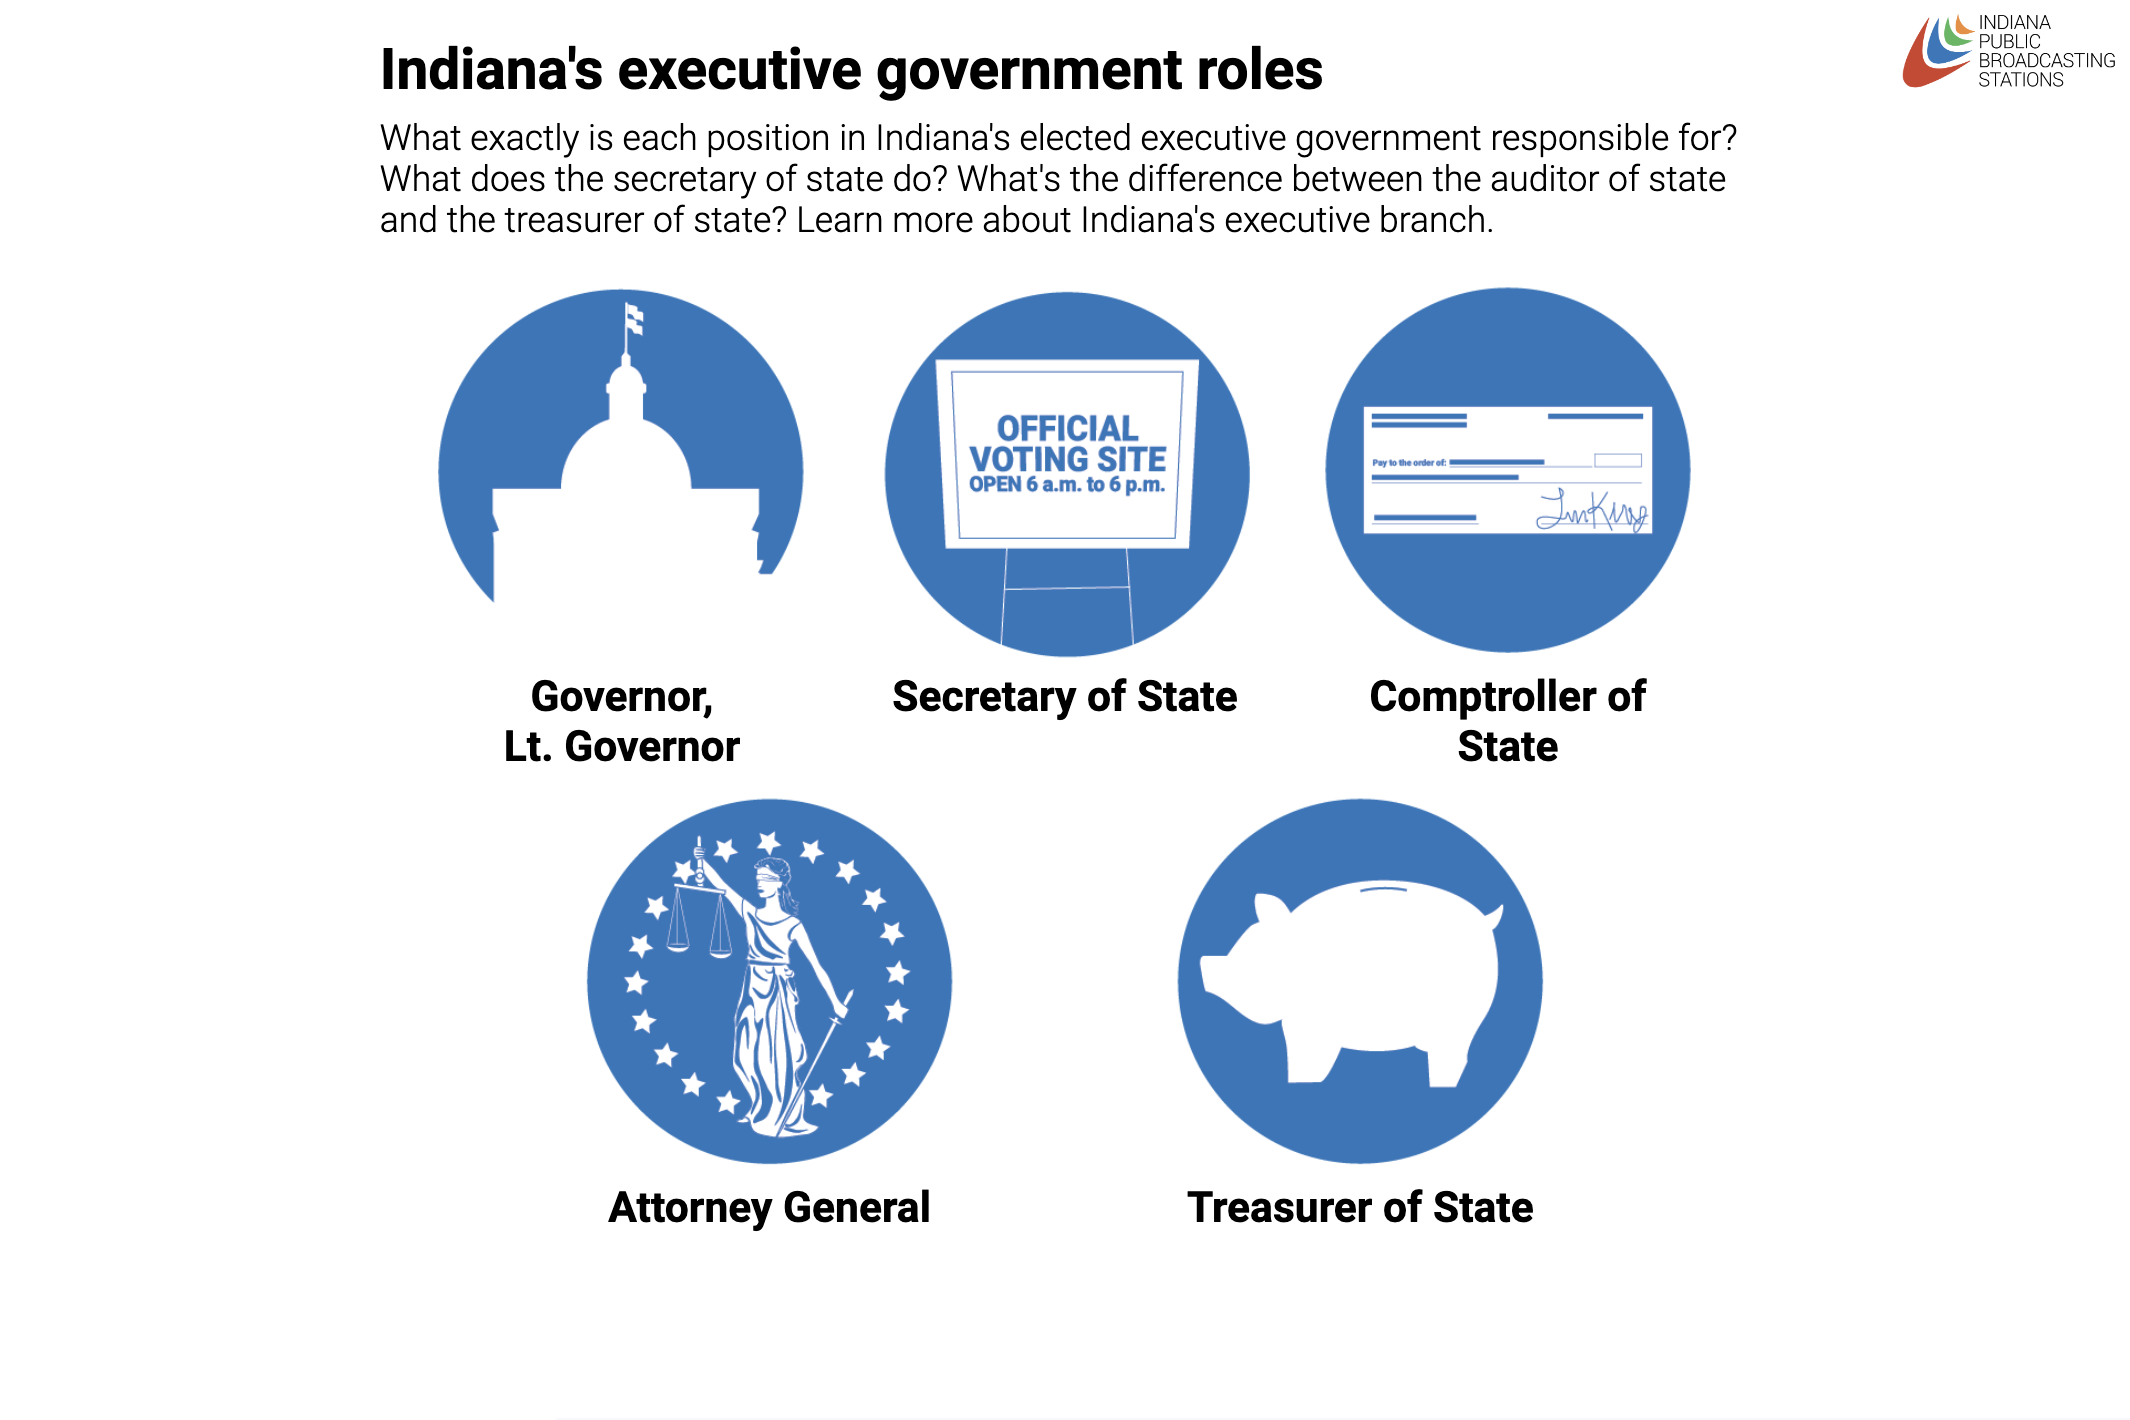 A preview of the graphic that lists all the elected executive positions in Indiana's government.